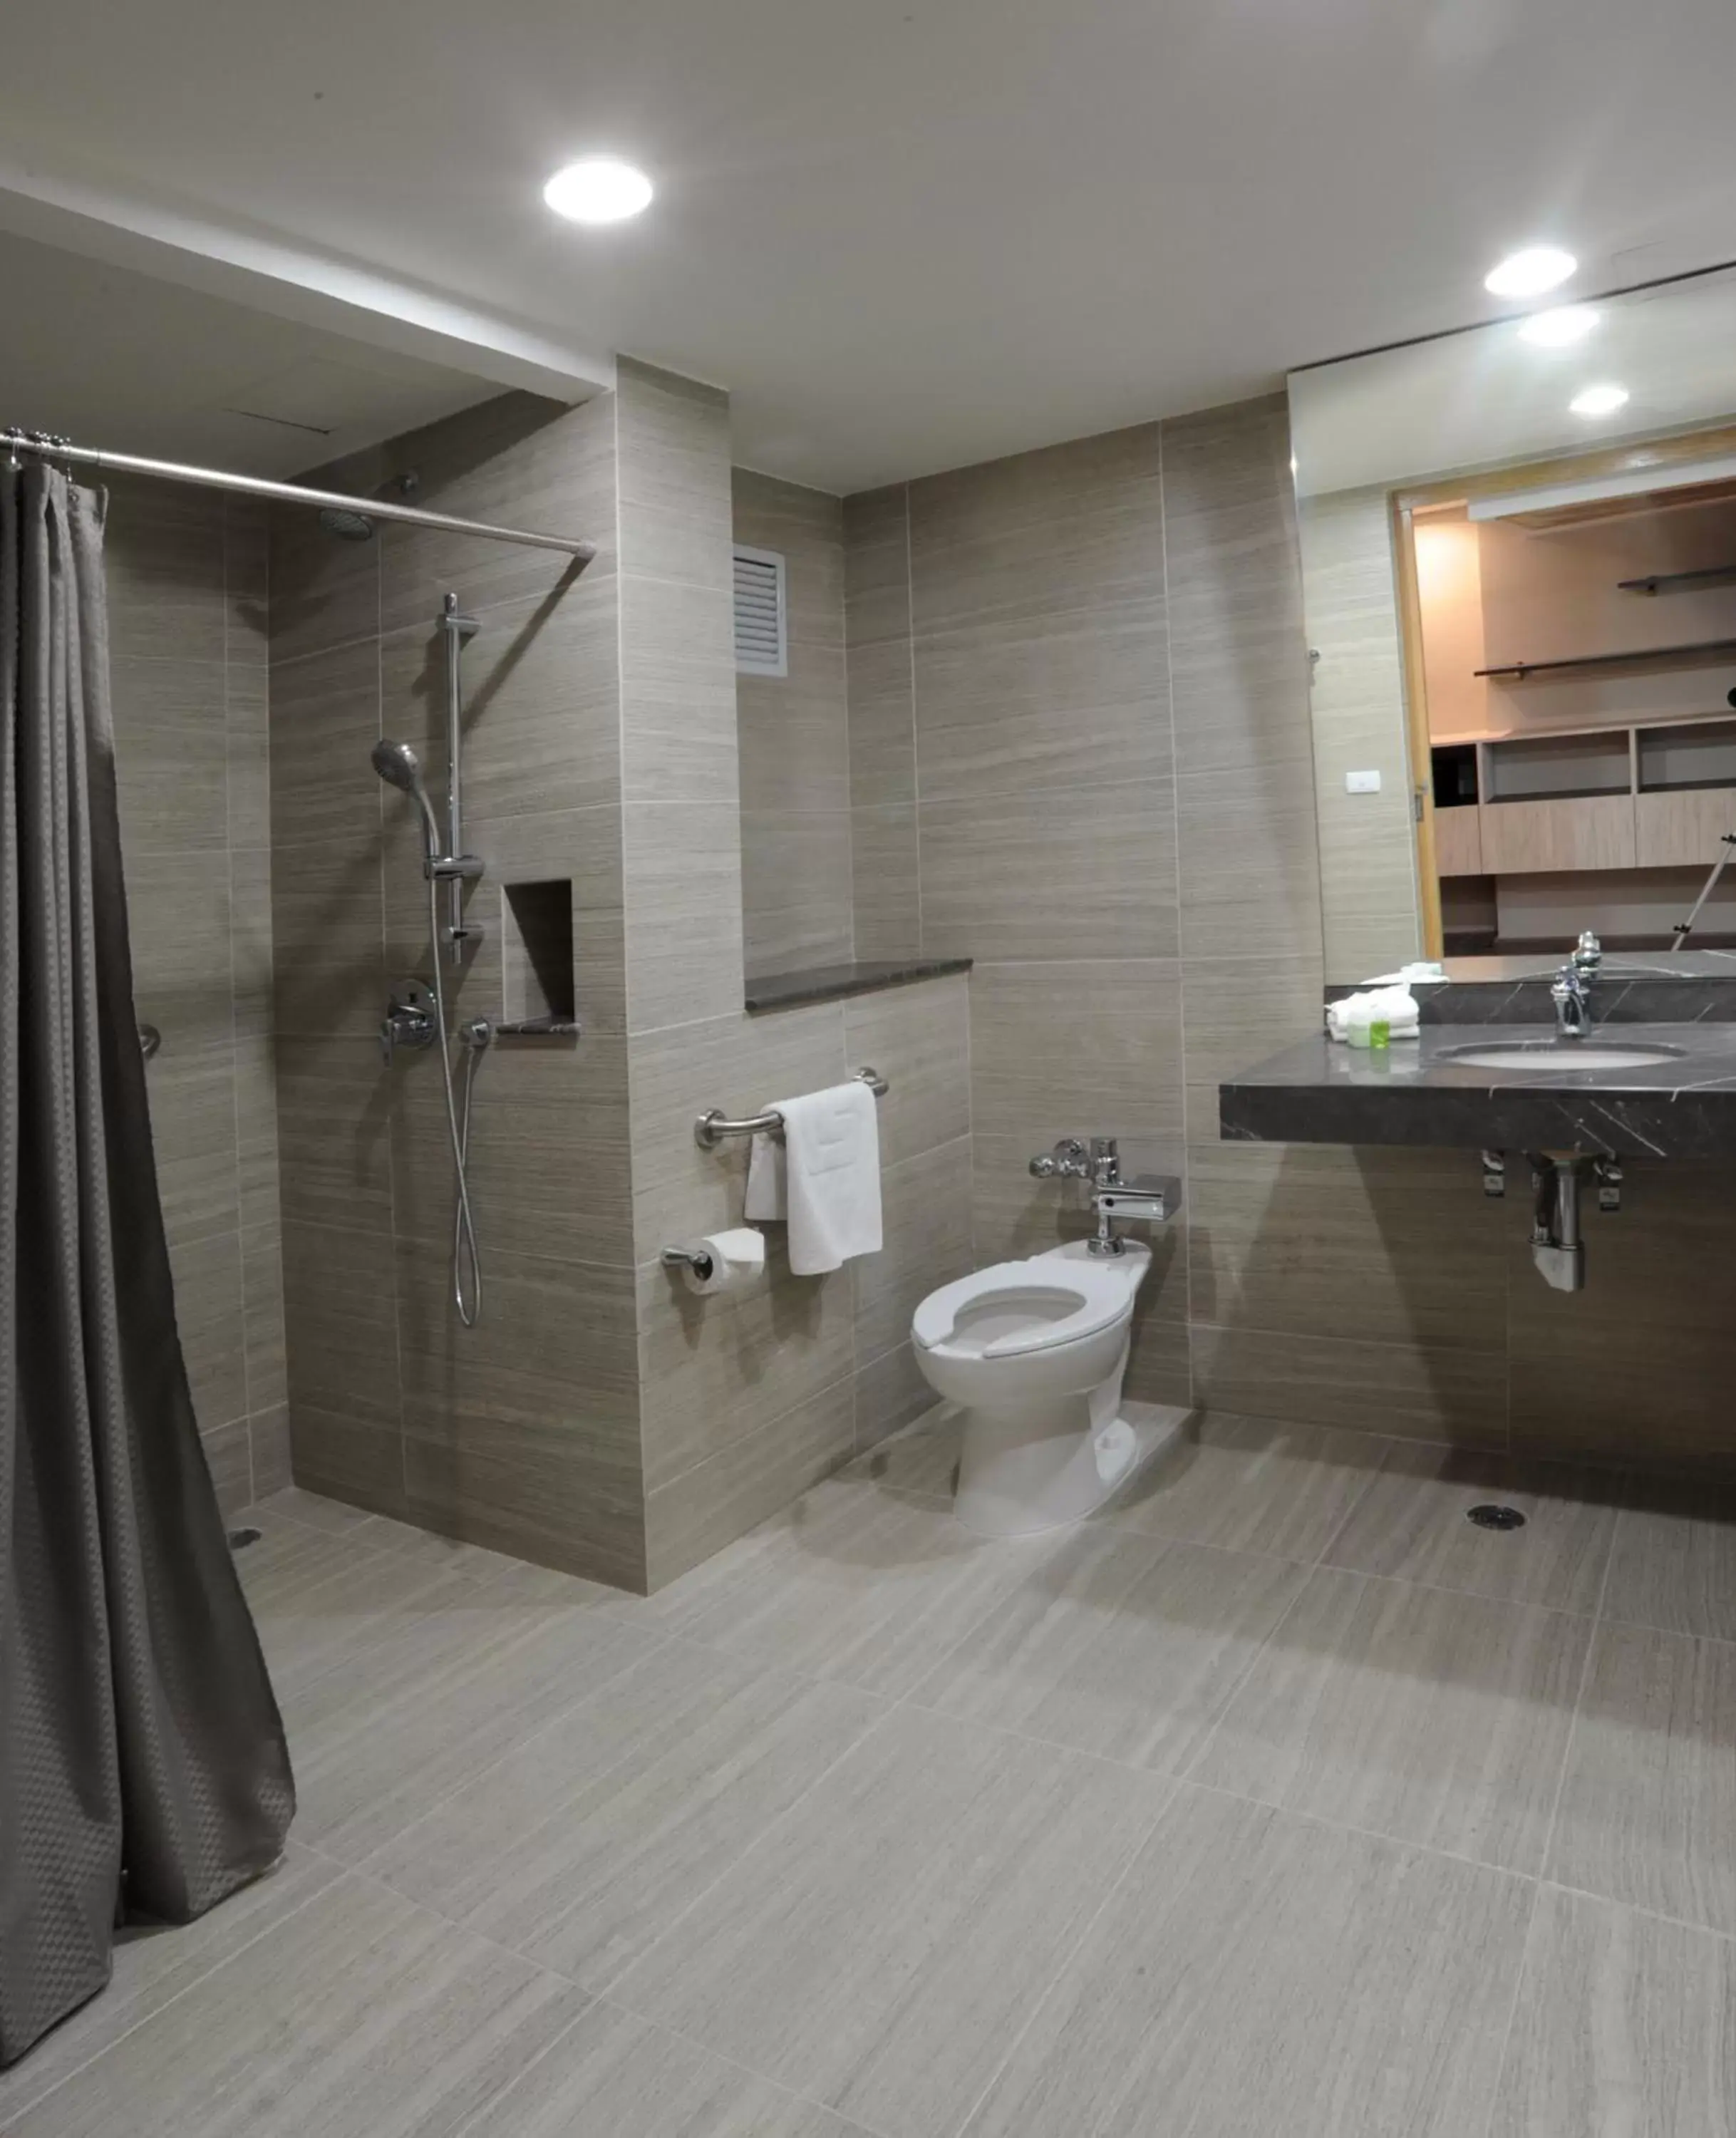 Facility for disabled guests, Bathroom in Hotel Benidorm